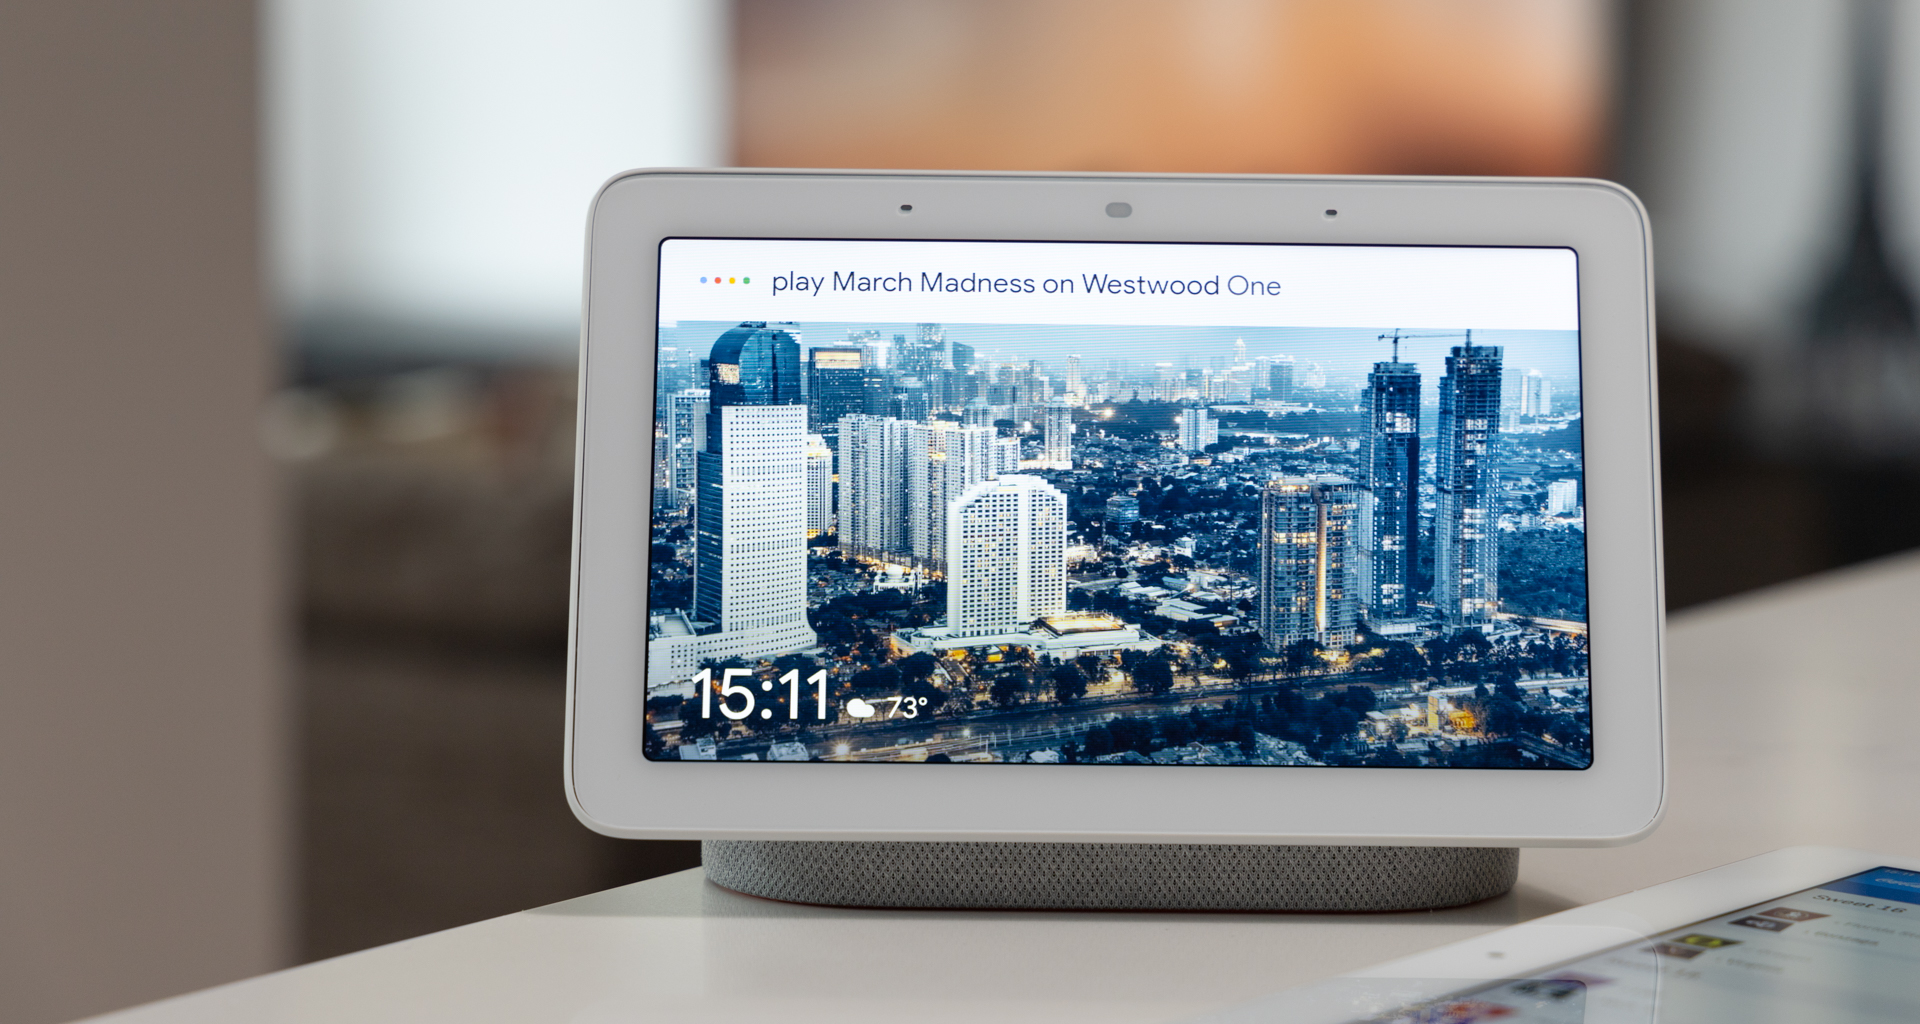 Smart displays, such as the Google Home Hub, are ideal for listening to the big games. Image: Digitized House Media.